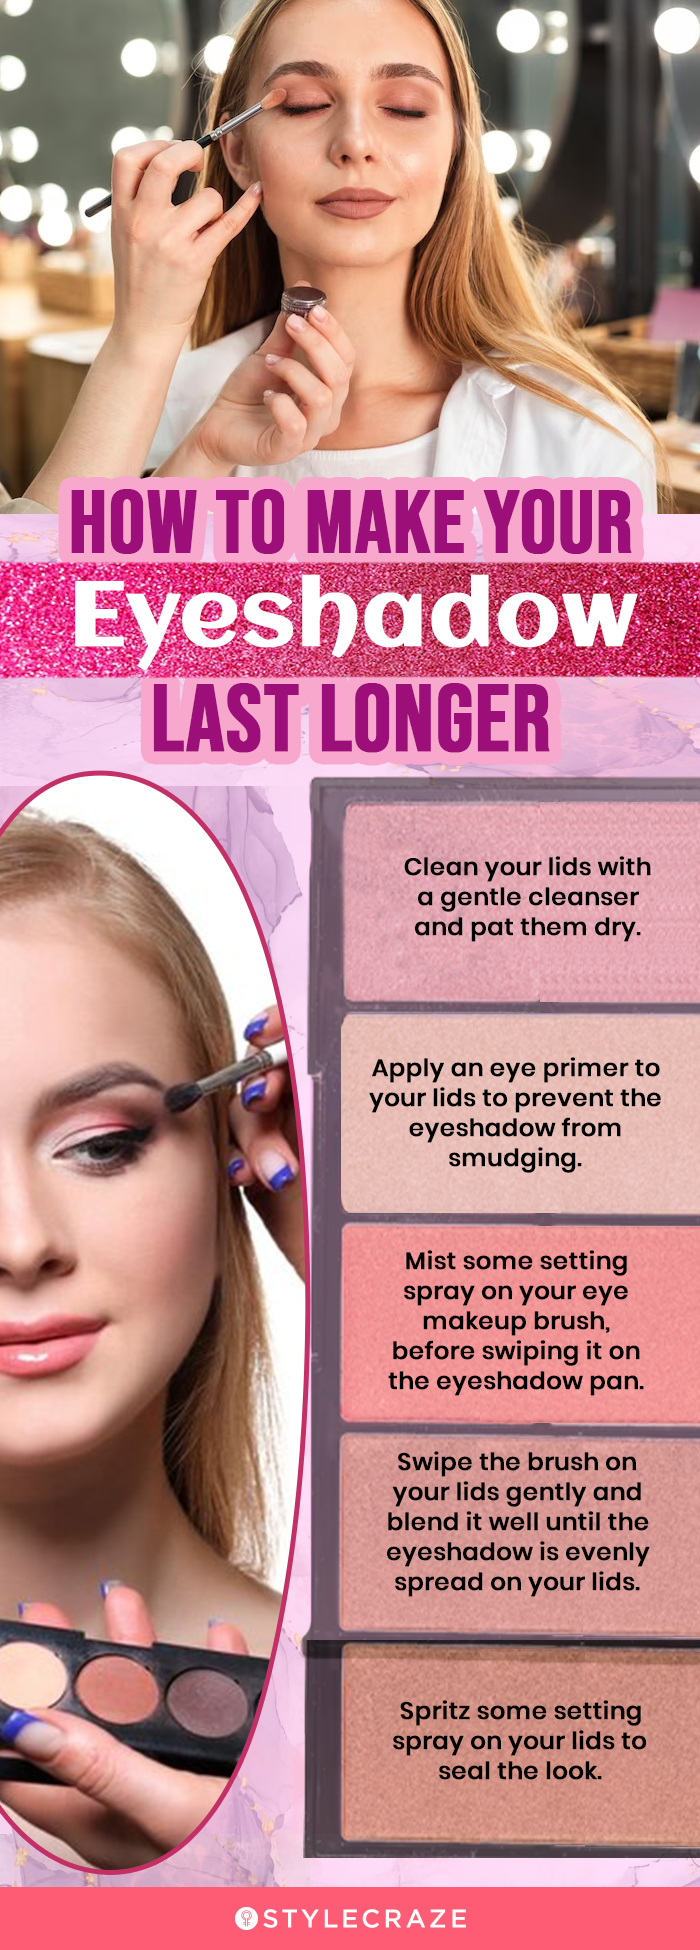 How To Make Your Eyeshadow Last Longer (infographic)